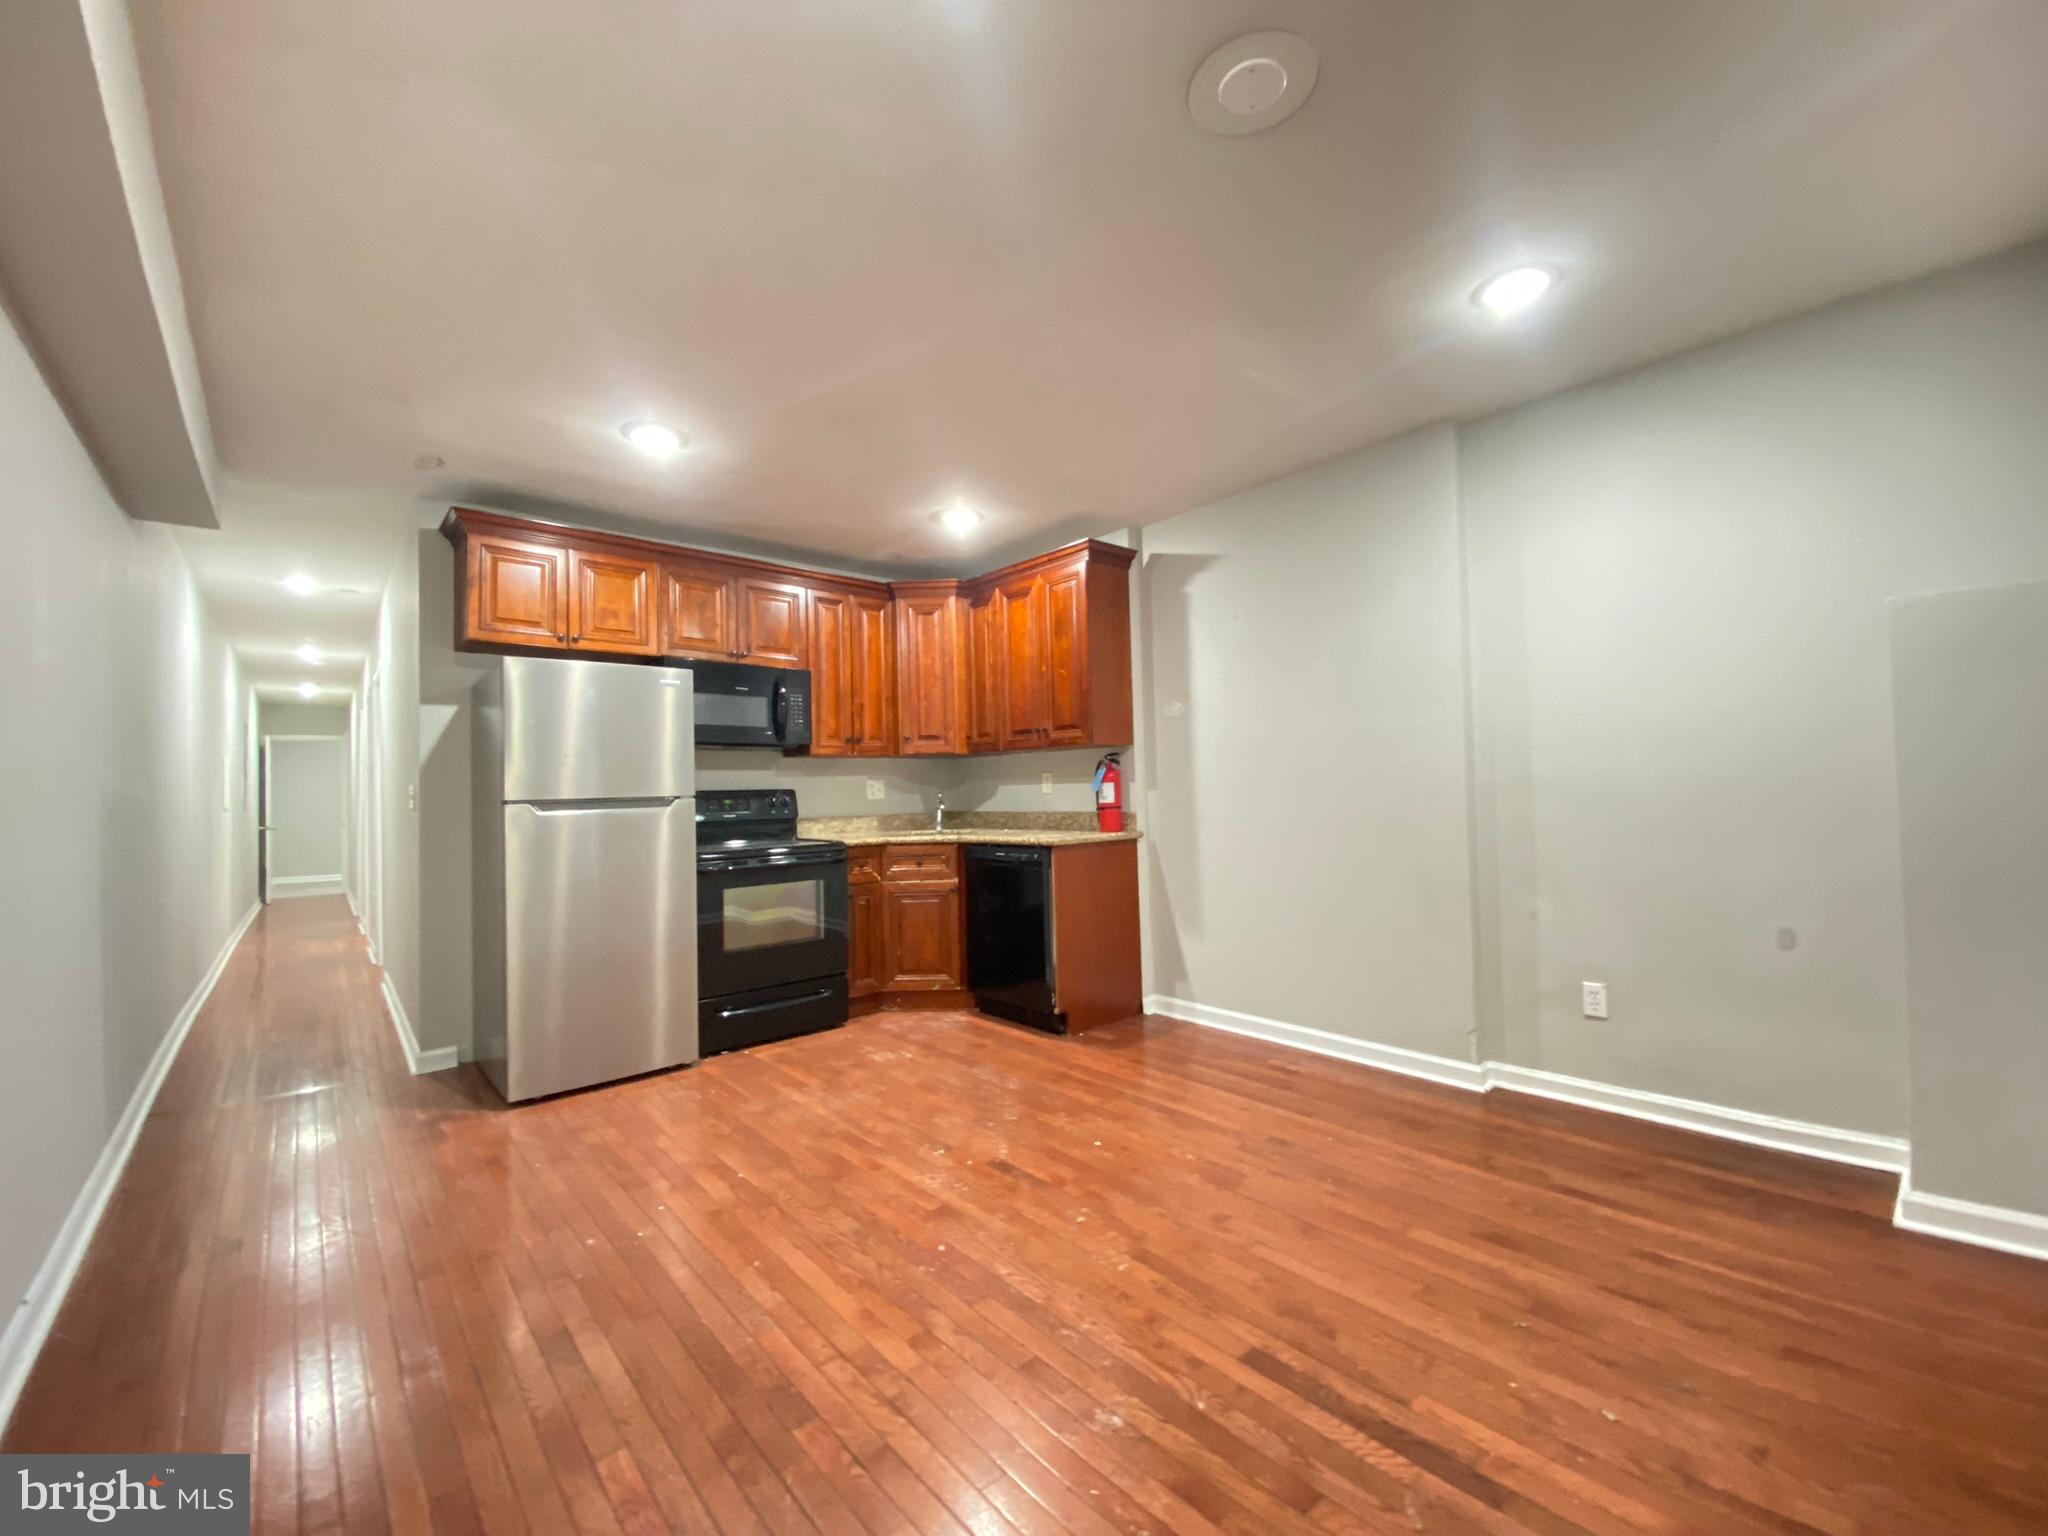 a kitchen with stainless steel appliances a refrigerator and a wooden floor